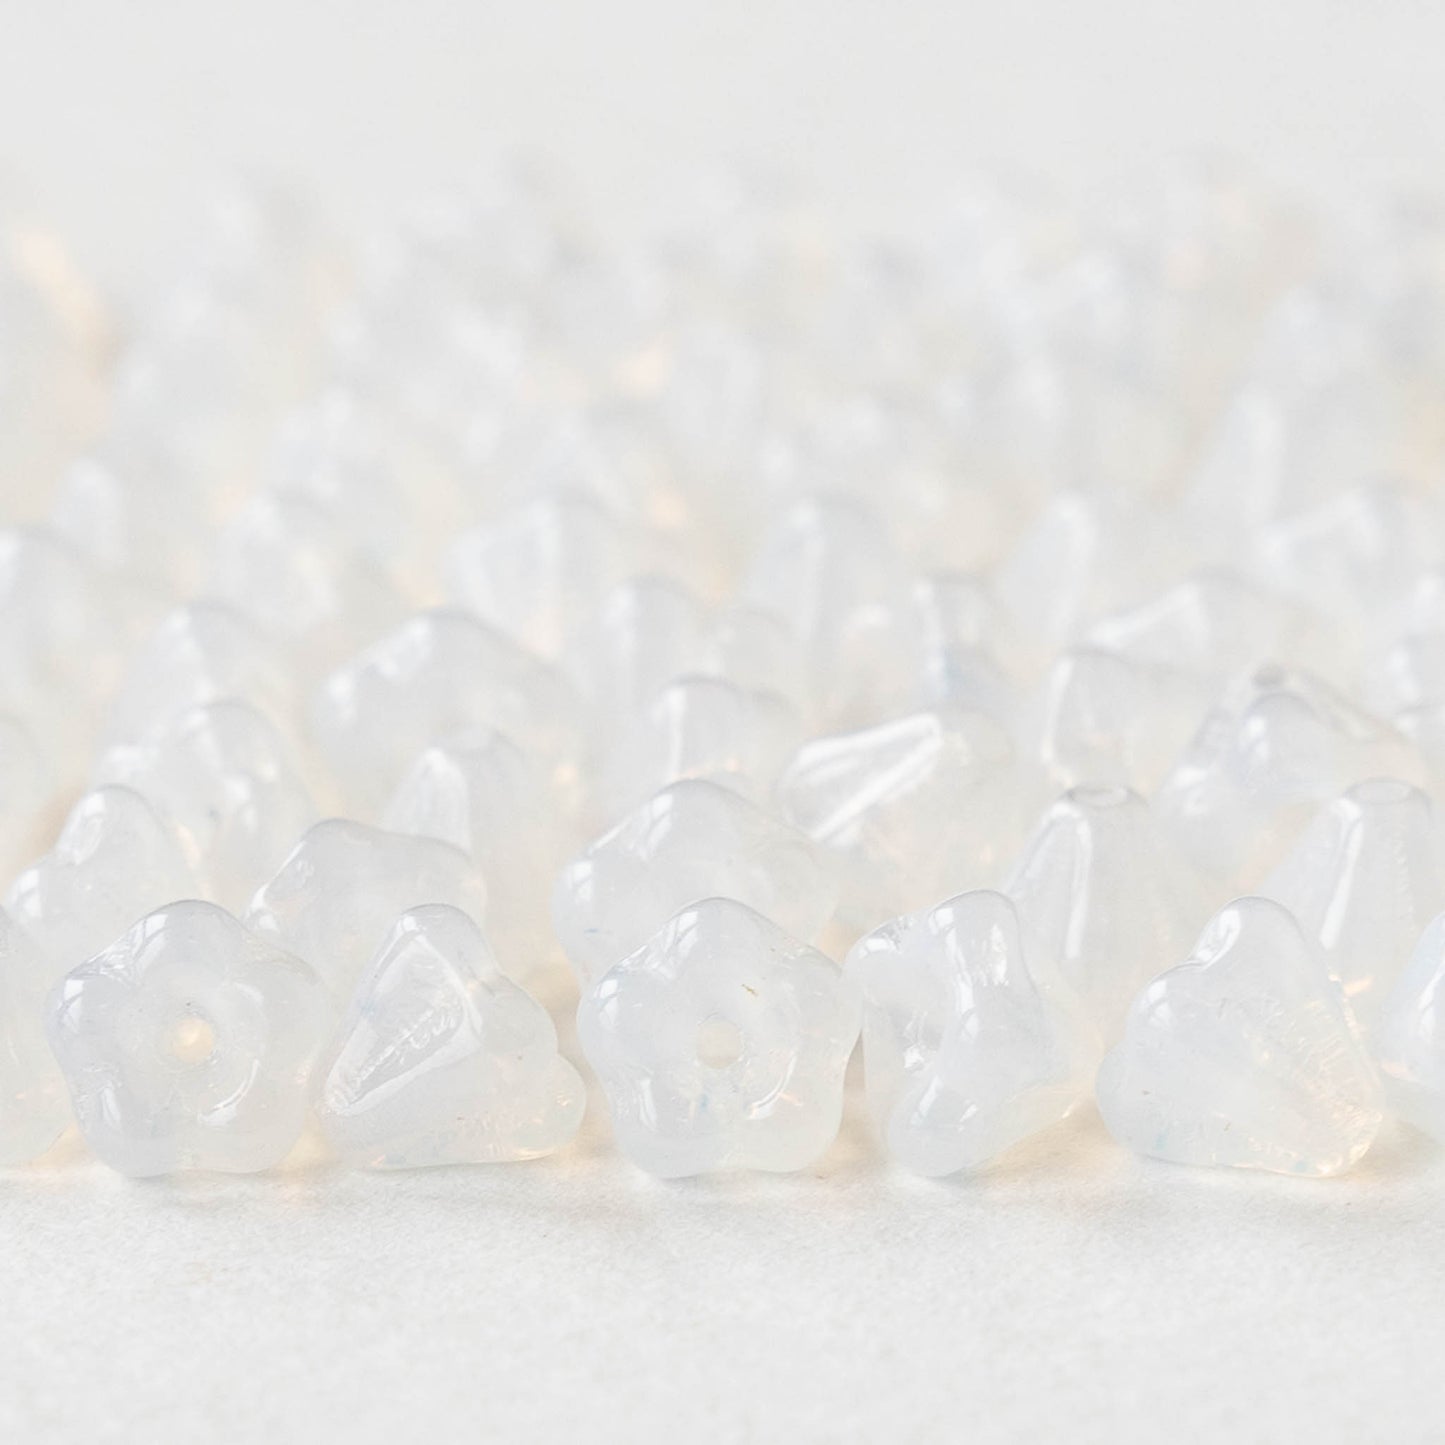 4x6mm Glass Flower Beads - Pearly White Opaline - 75